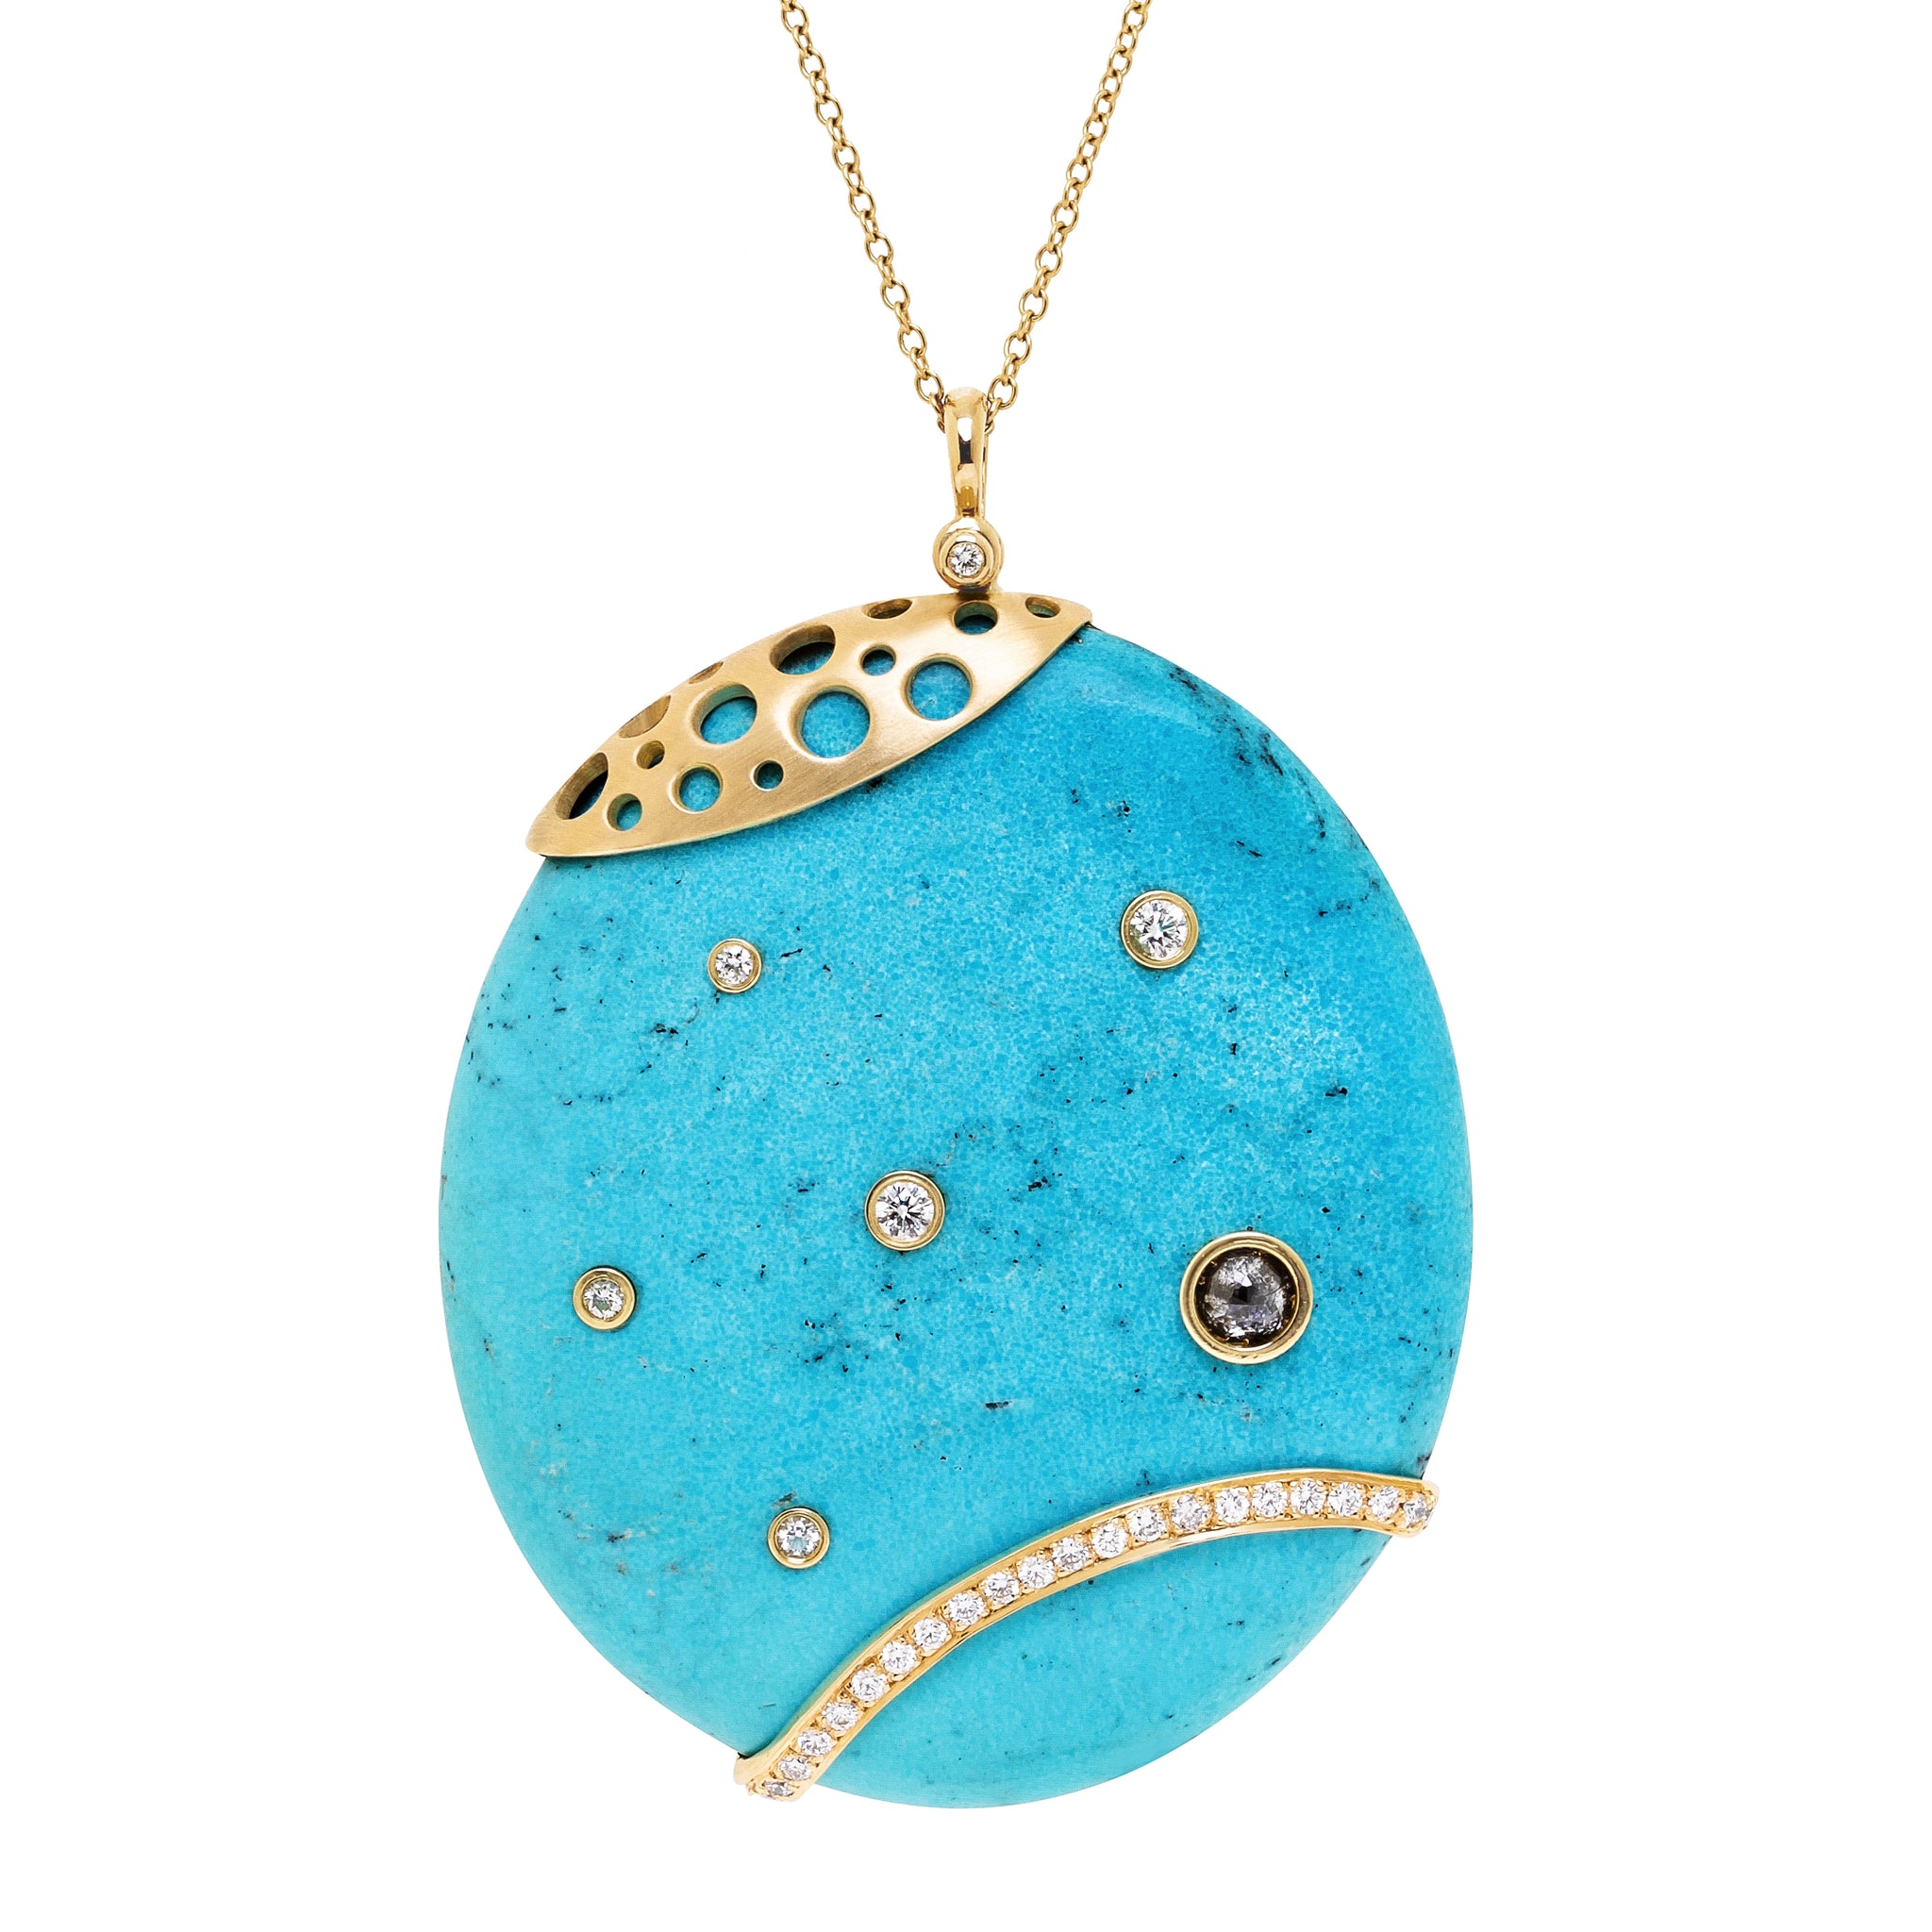 Hats Off to the King Galaxy Turquoise Pendant